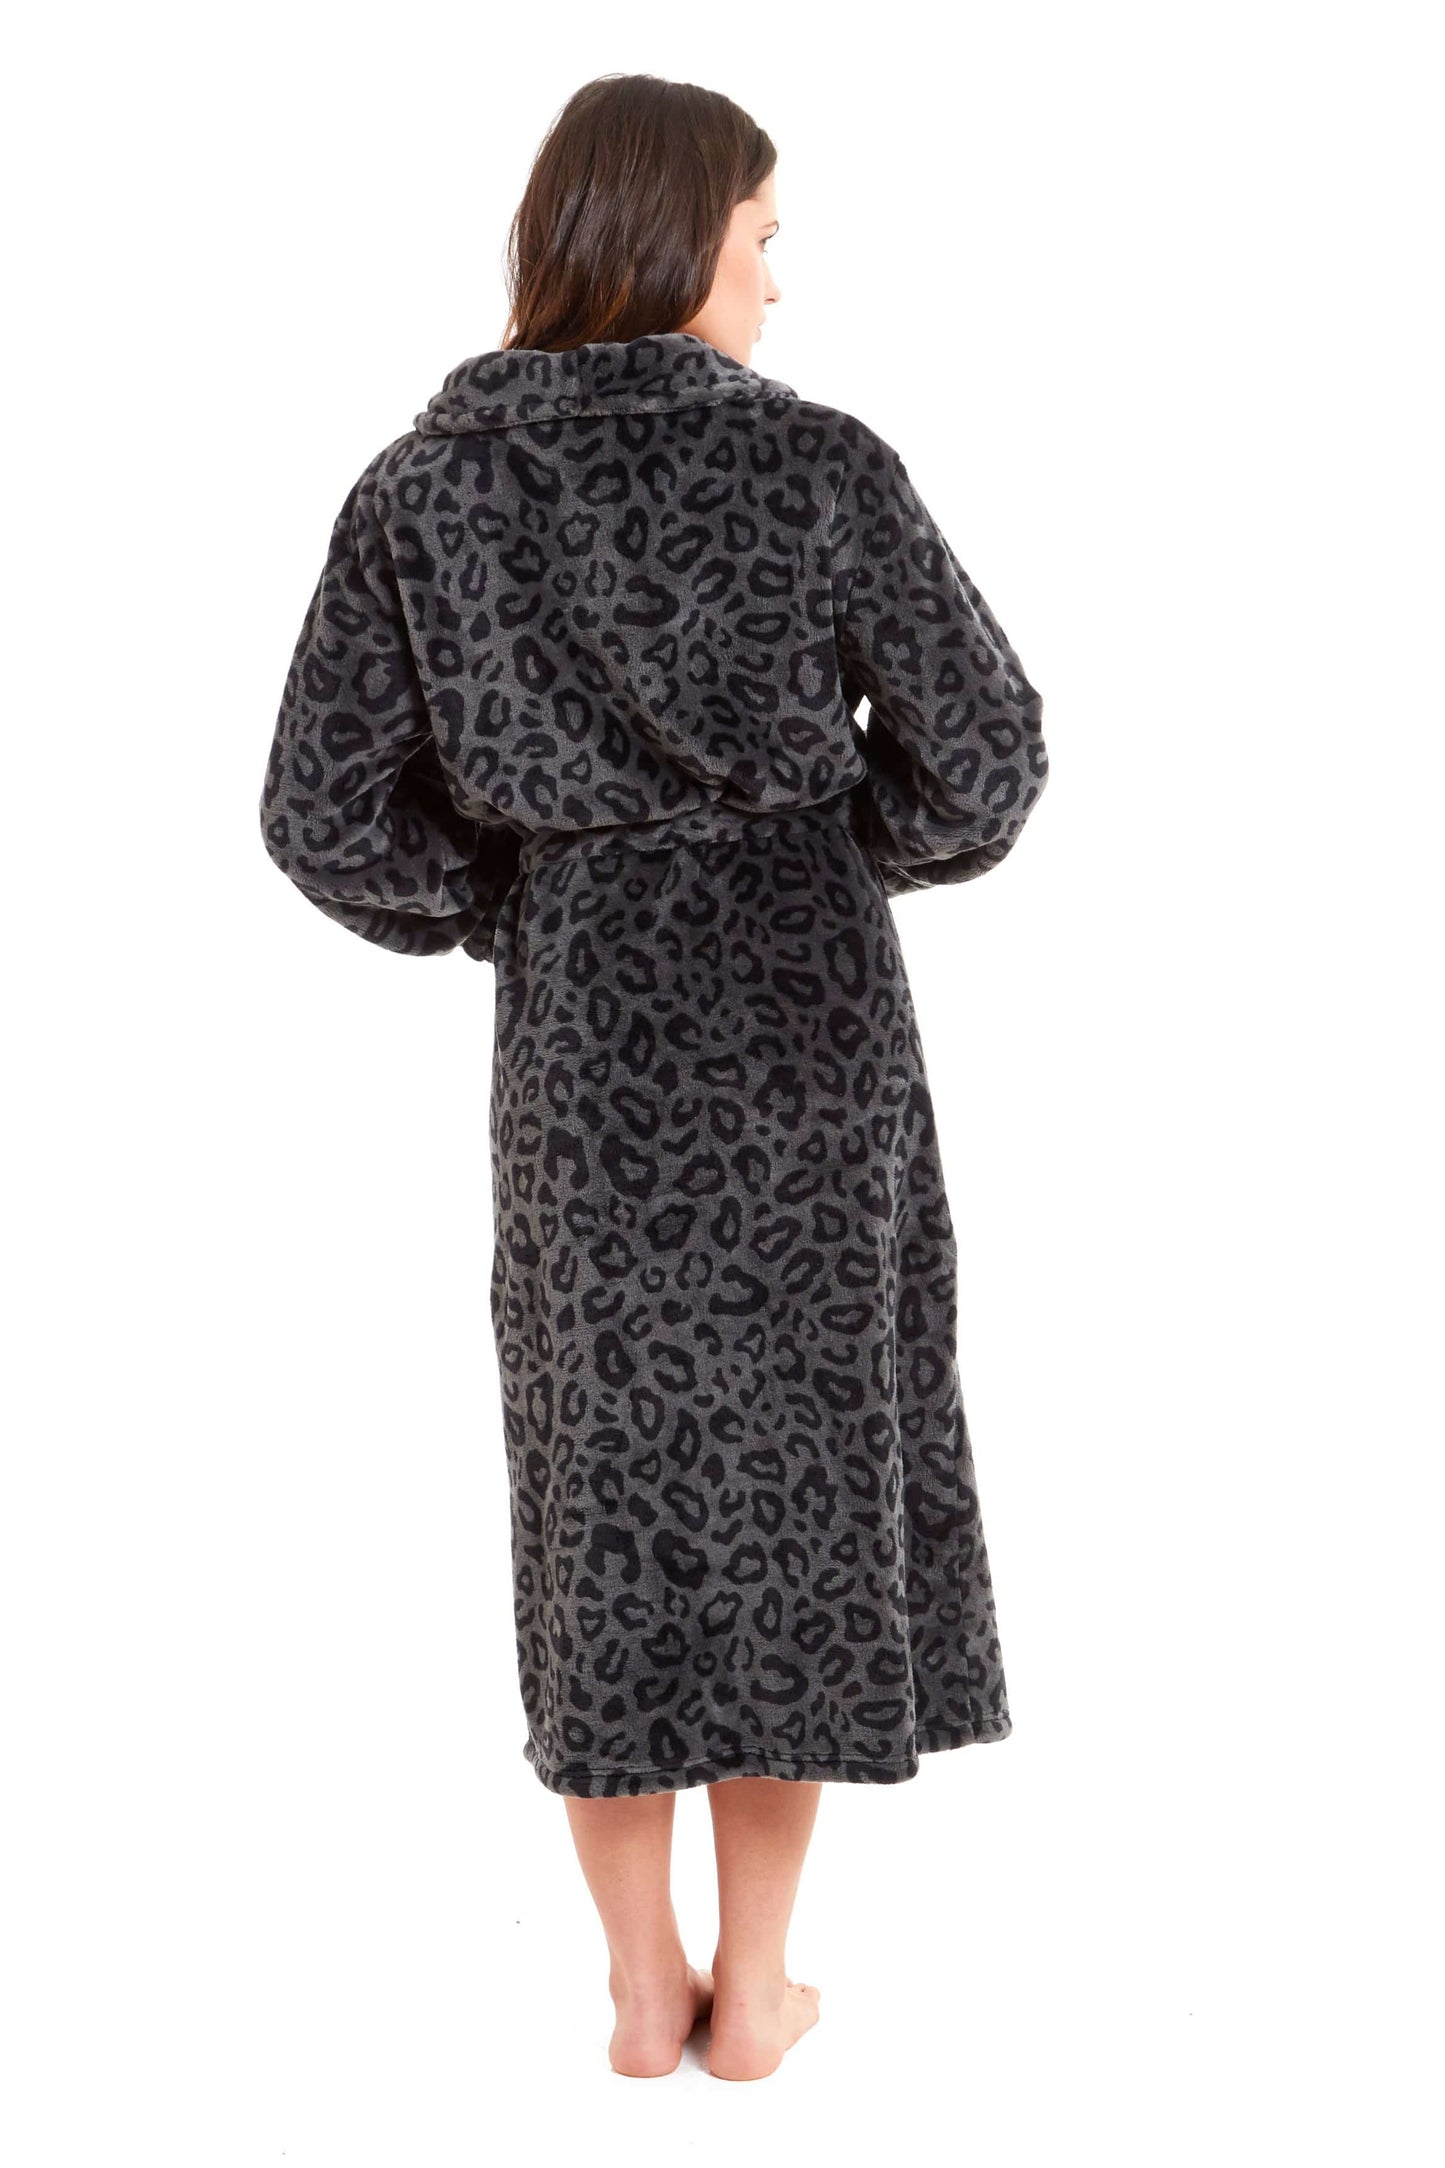 Women's Black Leopard Plush Fleece Bath Robe Dressing Gown. Buy now for £20.00. A Robe by Daisy Dreamer. 12-14, 16-18, 20-22, 8-10, animal, black, black panther, bridesmaid, cheetah, dressing gown, flannel, fleece, gym, hotel, ladies, large, leopard, loun